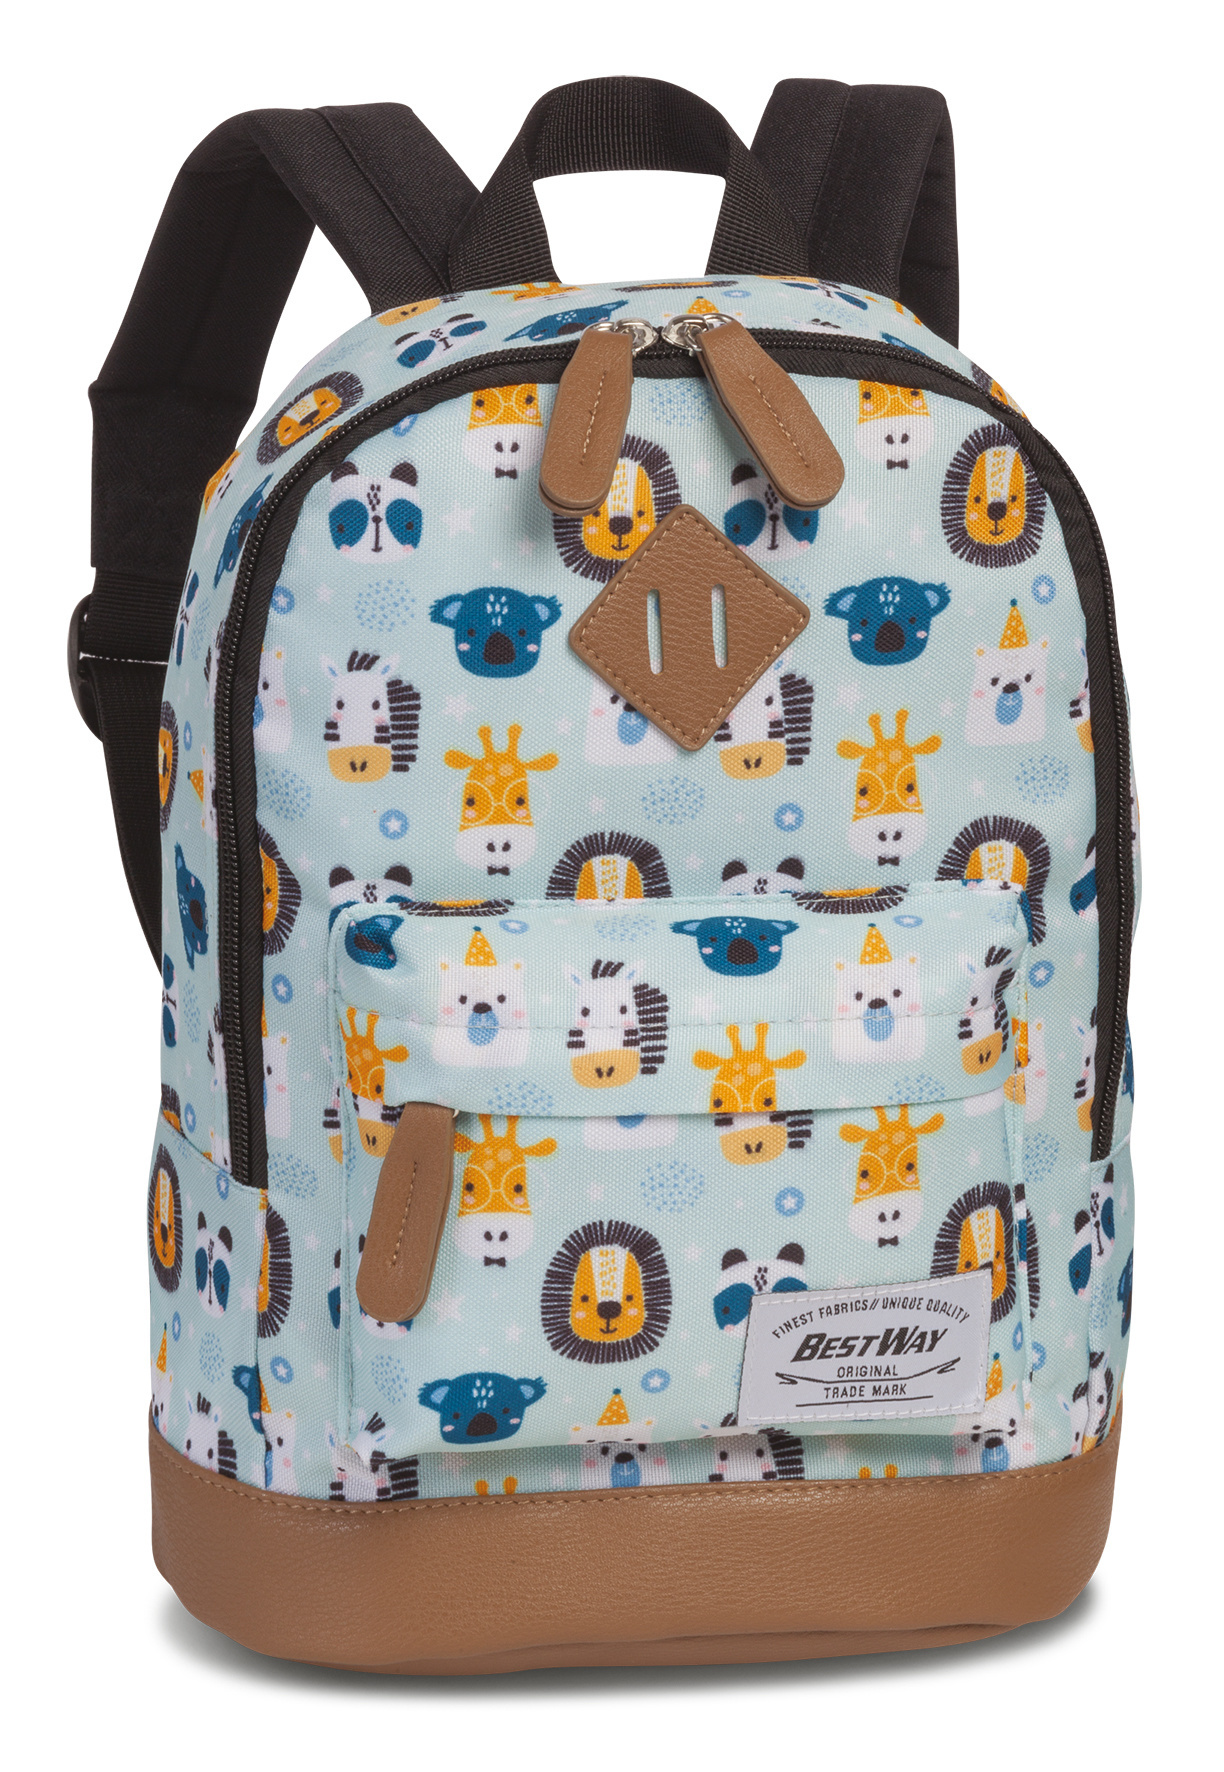 Bestway Toddler backpack, Zoo - 29 x 21 x 13 cm - Polyester